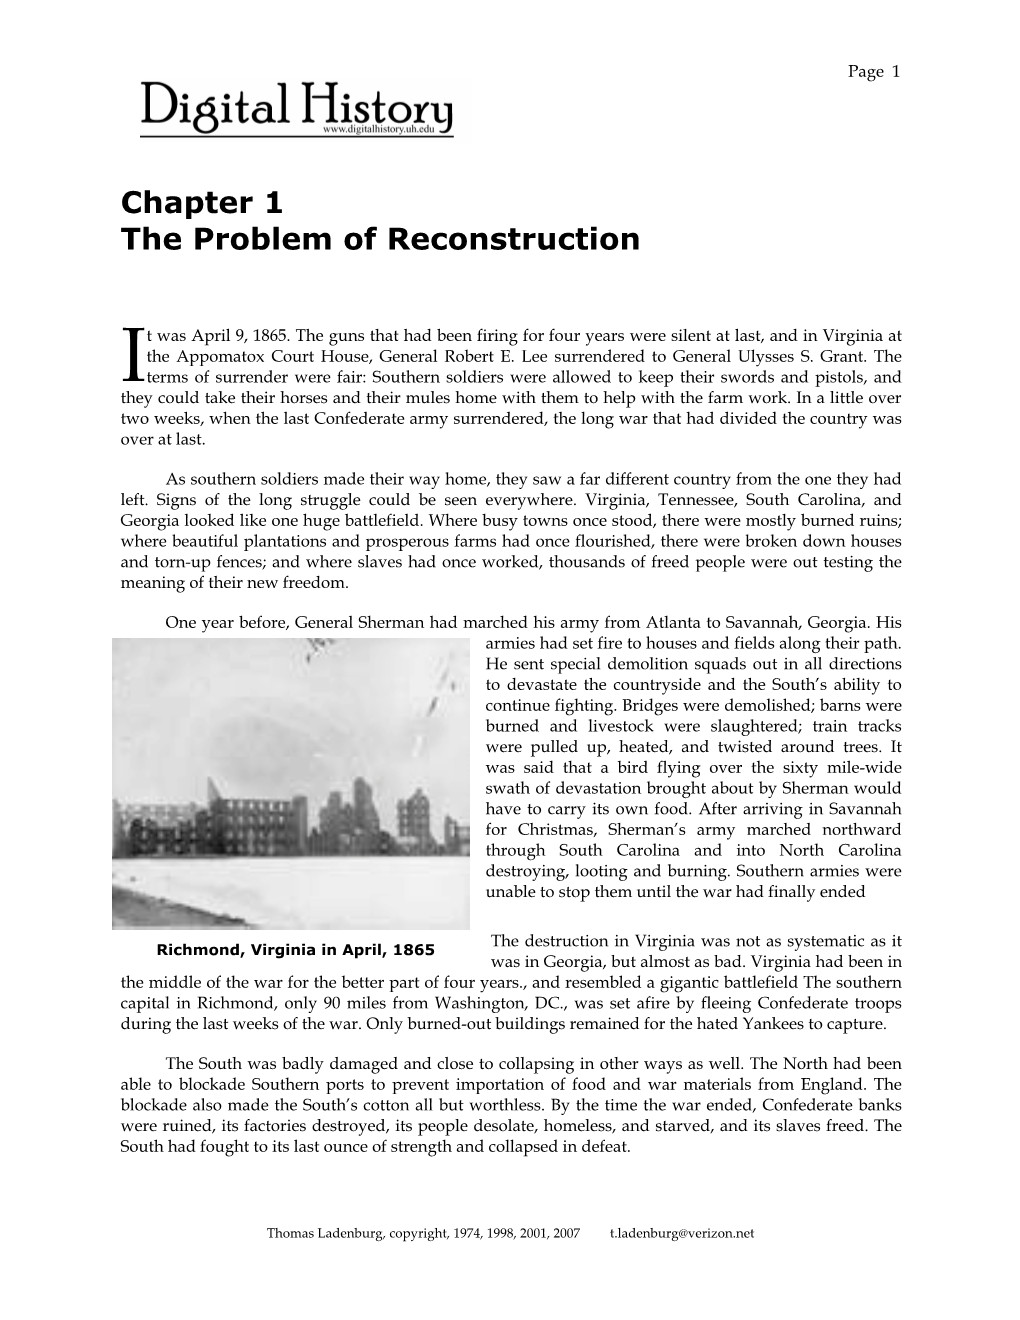 Chapter 1 the Problem of Reconstruction